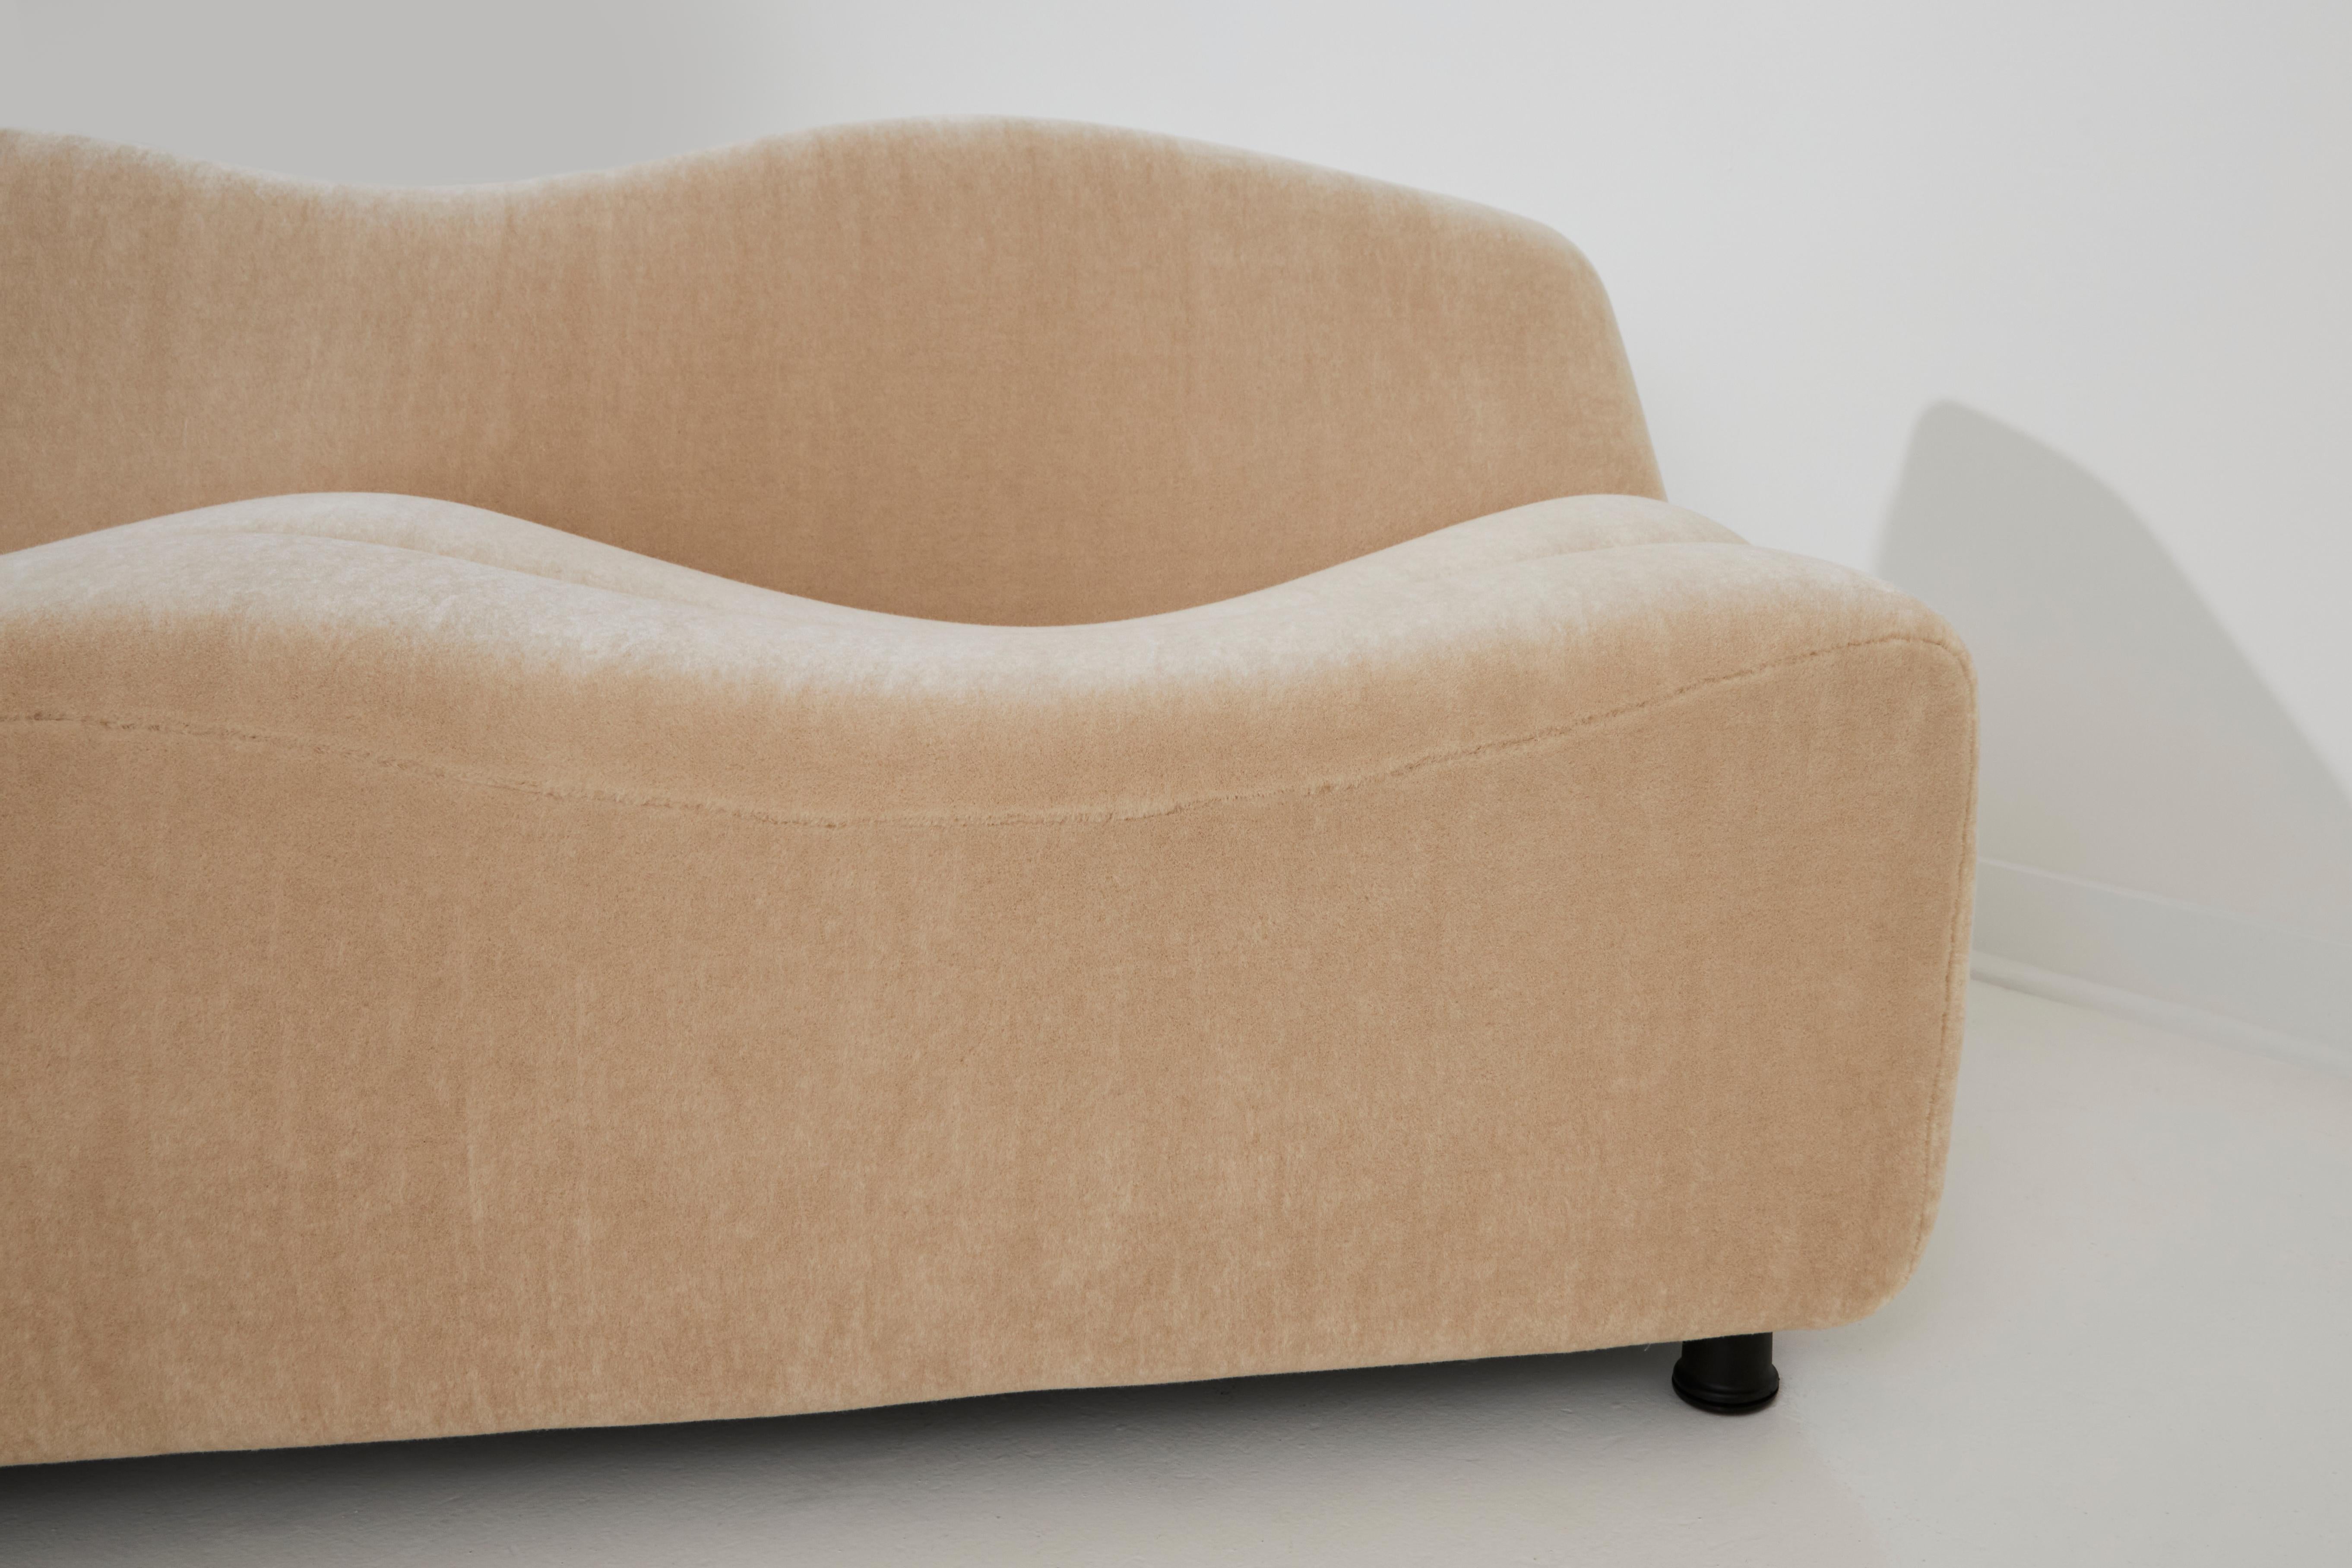 The ABCD sofa, a design by Pierre Paulin from 1968, stands as a testament to his innovative and forward-thinking design ethos. This sofa is truly unique, characterized by its unconventional and highly distinctive design.

One of its standout